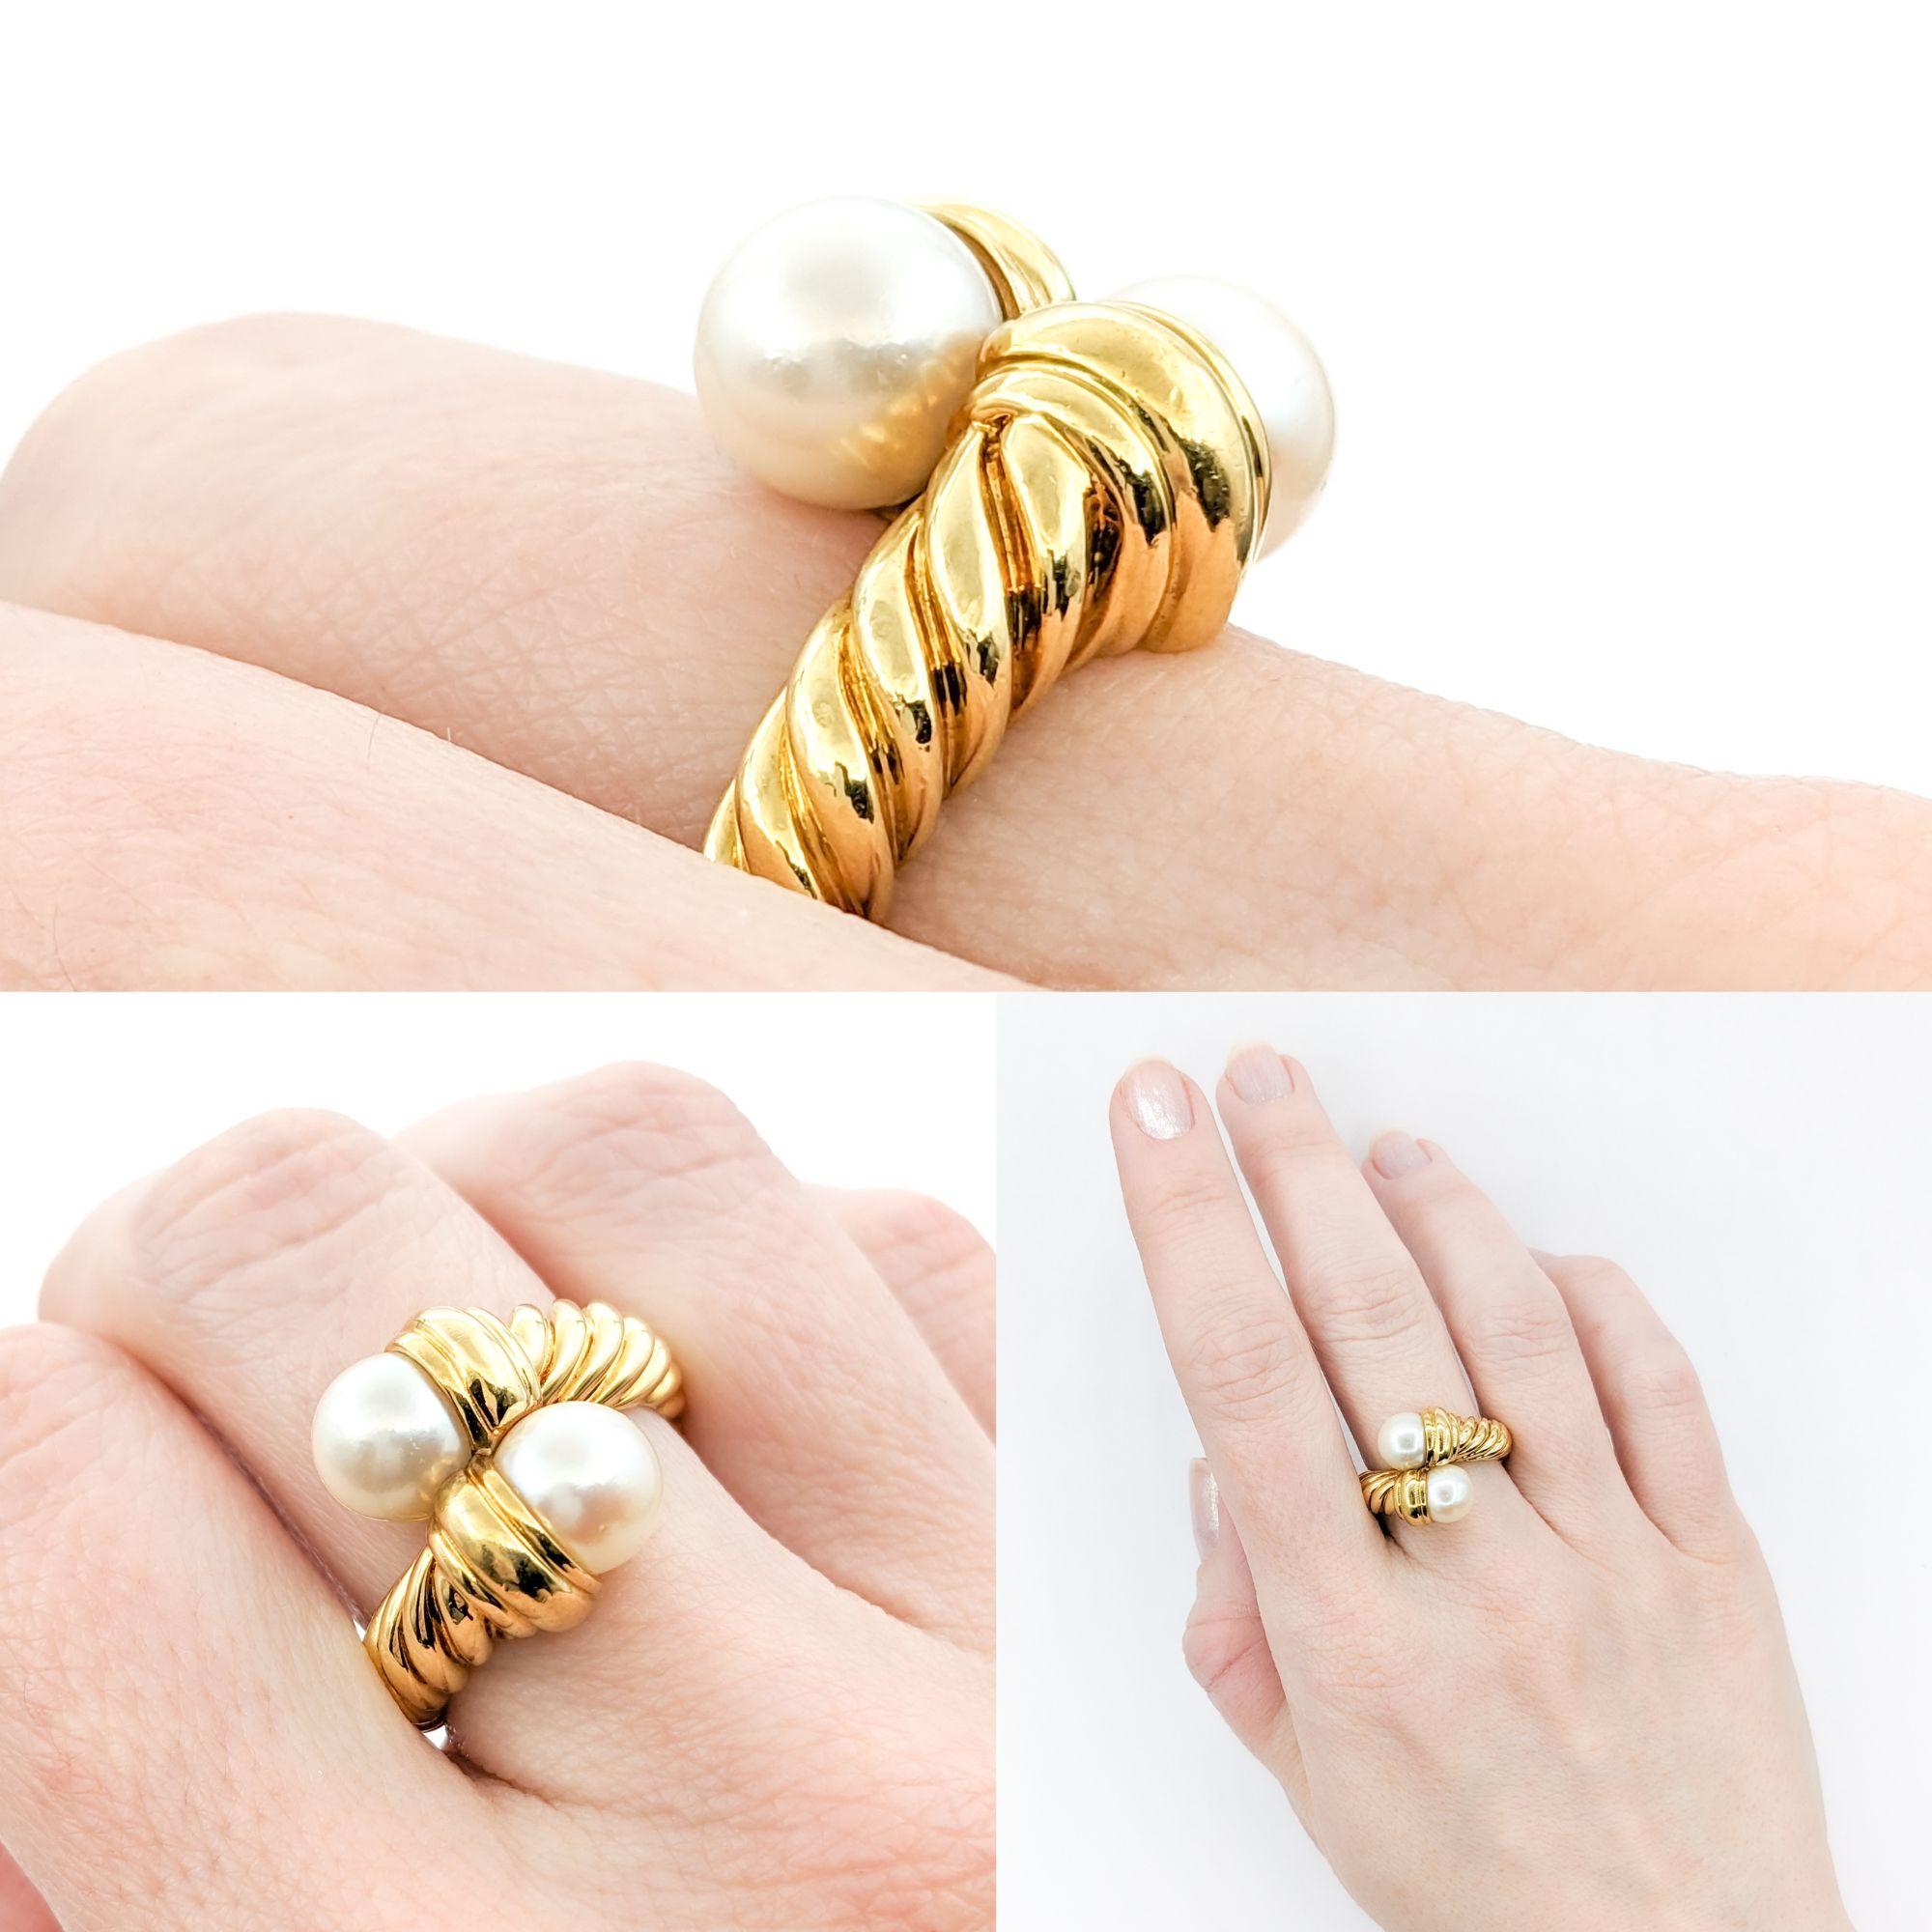 David Yurman Pearl Ring In Yellow Gold


This stunning David Yurman ring, masterfully crafted from 18kt yellow gold, showcases a luminous 7.8mm pearl as its centerpiece. The pearl, known for its elegant beauty, does not require clarity grading and